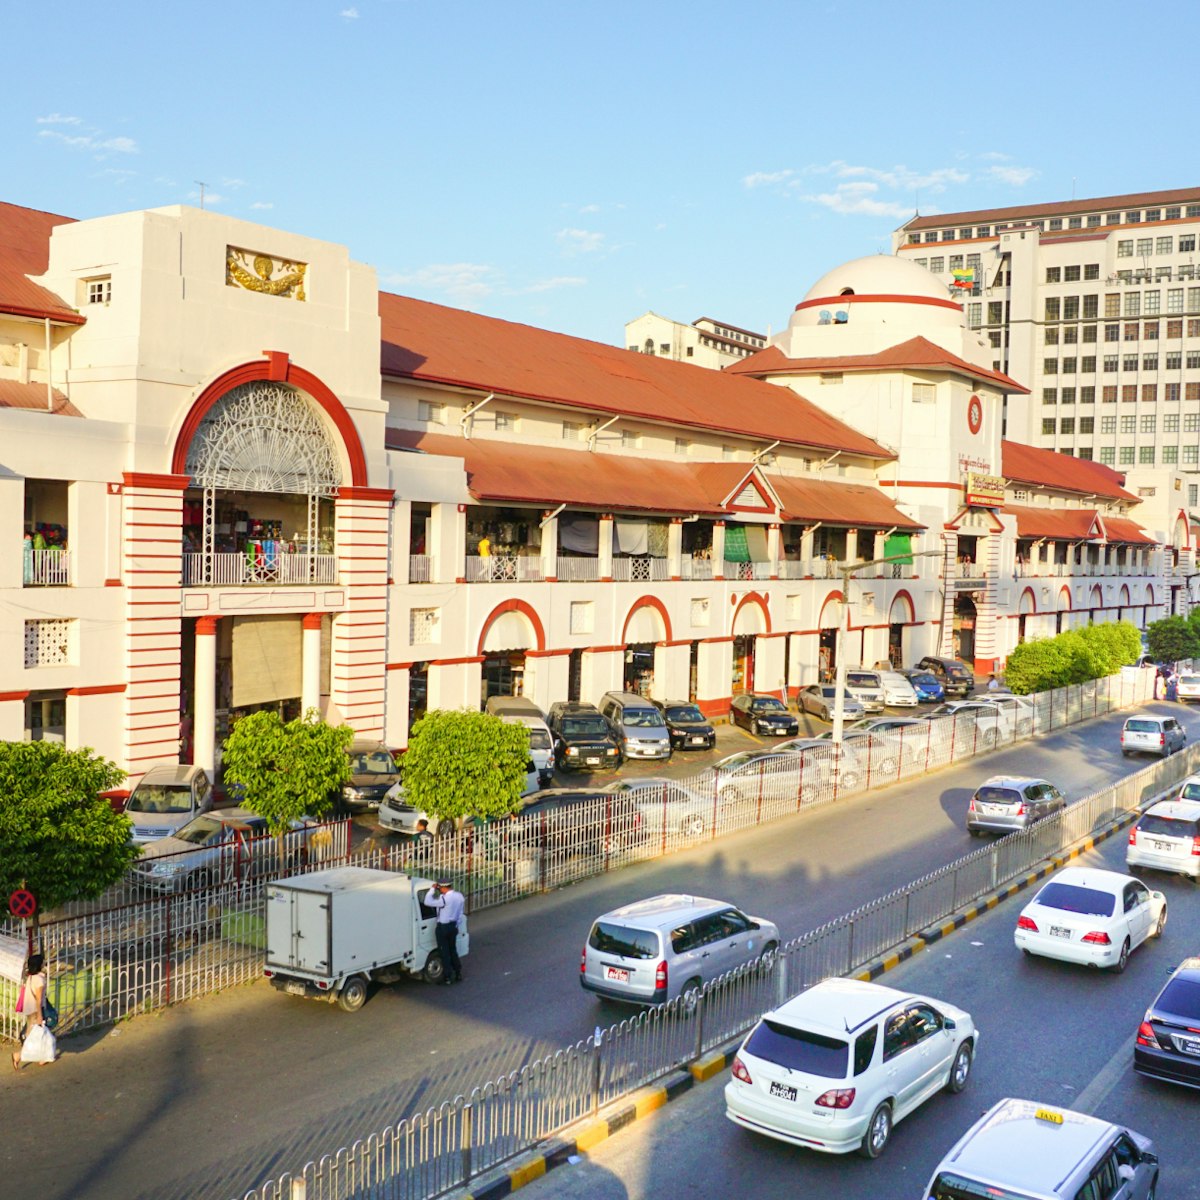 Yangon, Myanmar - Jan 14, 2015. The Sule Boulevard with famous Bogyoke Market built in 1926 and formely know as Scott Market. Sule Boulevard are the busiest street in Yangon.; Shutterstock ID 285905090; Your name (First / Last): Laura Crawford; GL account no.: 65050; Netsuite department name: Online Editorial; Full Product or Project name including edition: Yangon images for city app POIs